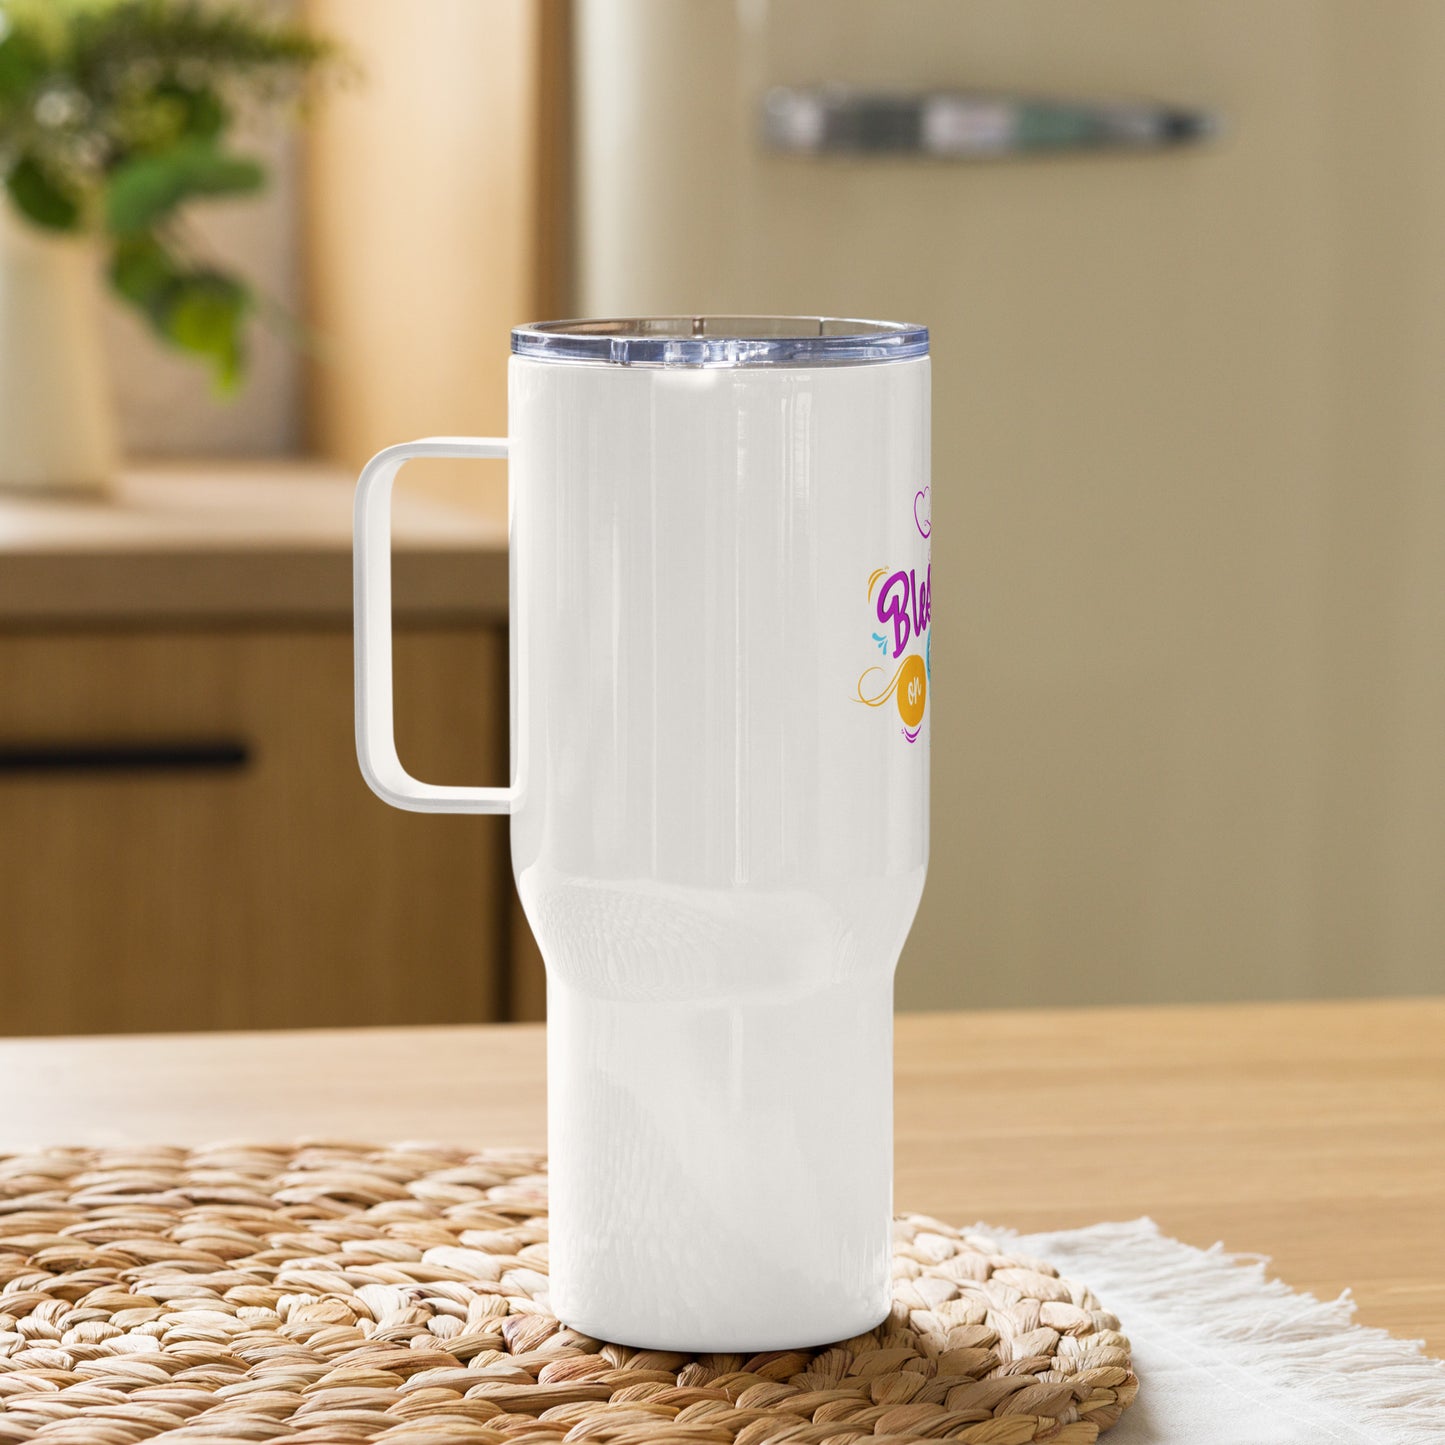 Blessings On Overflow Christian Travel mug with a handle